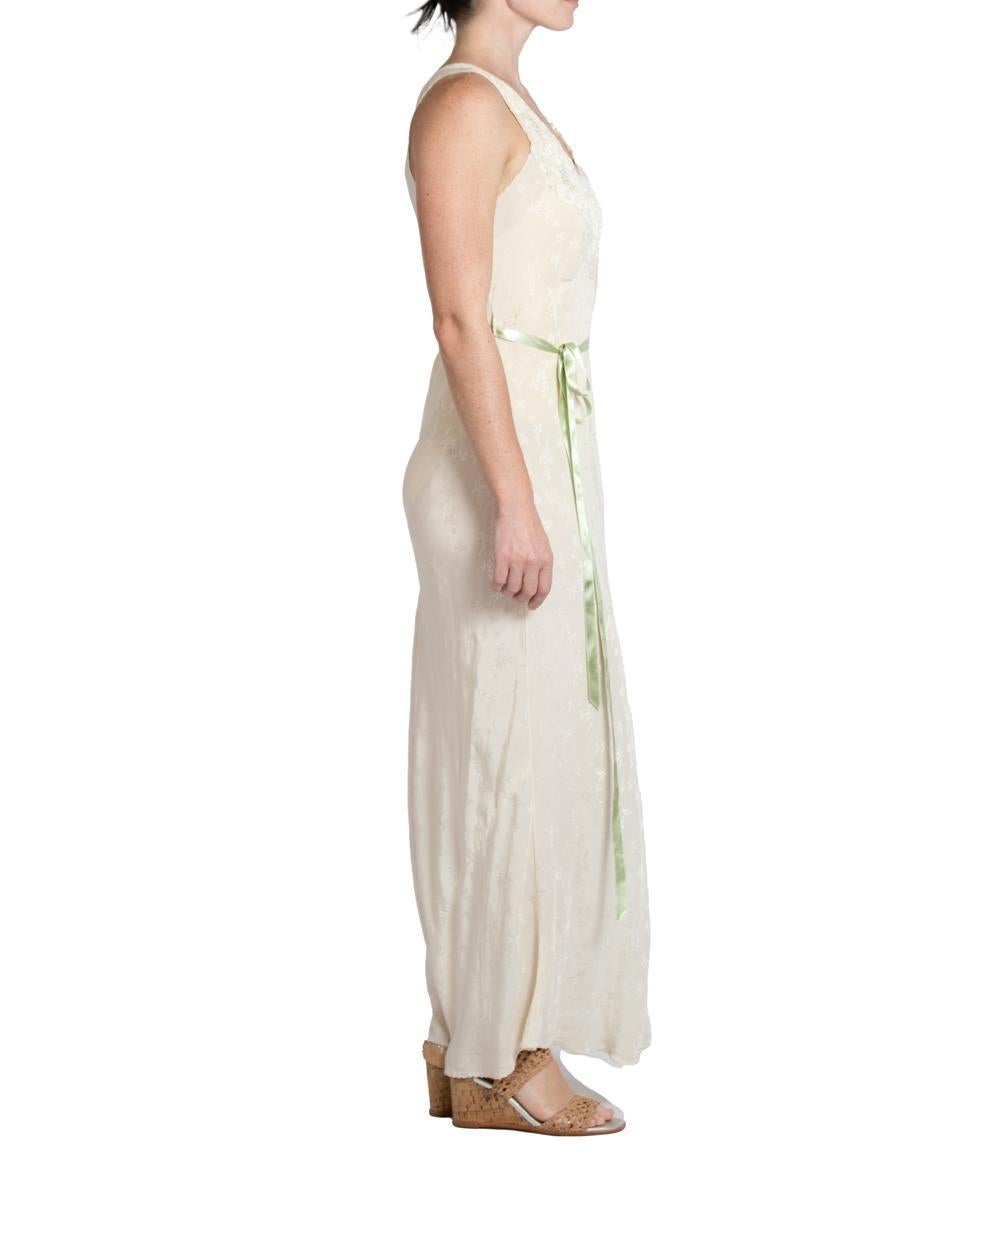 Women's 1930S Cream Bias Cut Silk Jacquard Negligee With Couture Grade Embroidery For Sale